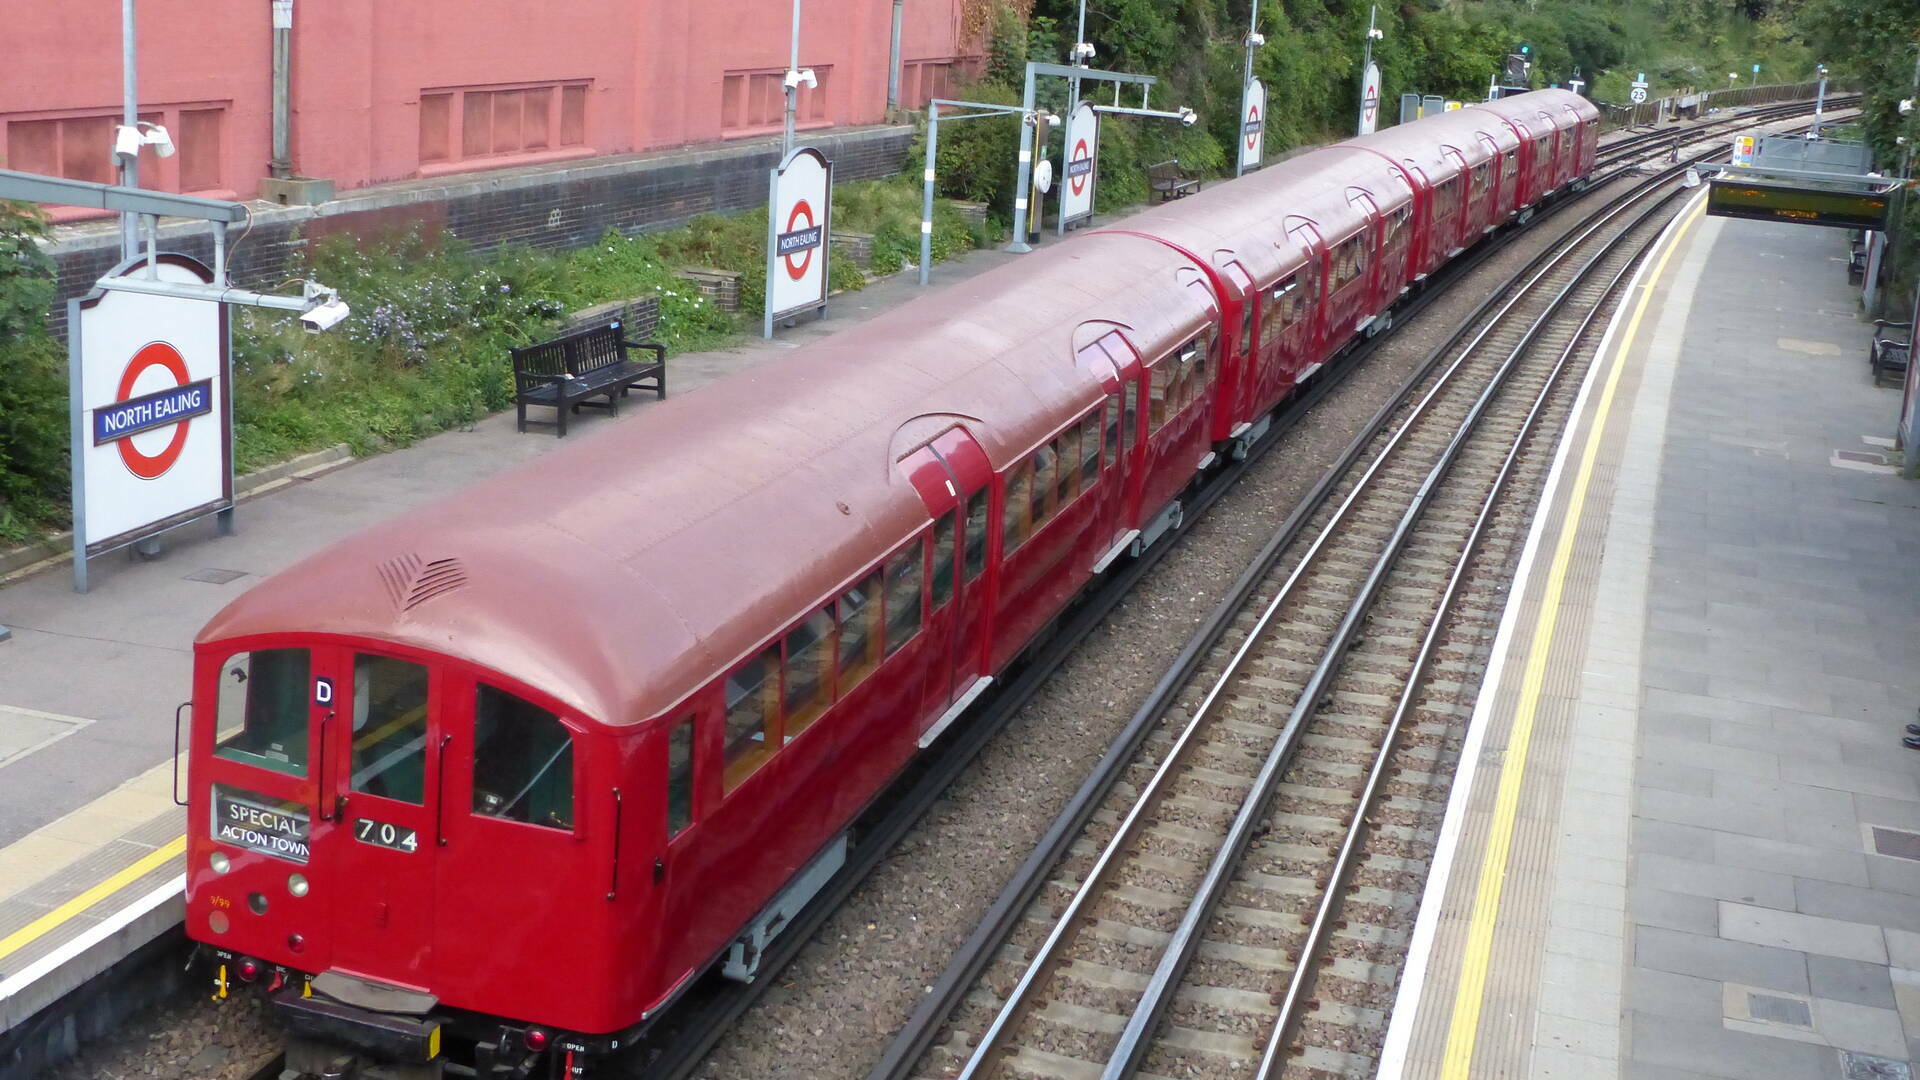 you’ll-be-able-to-ride-a-dazzling-vintage-tube-train-in-london-this-september